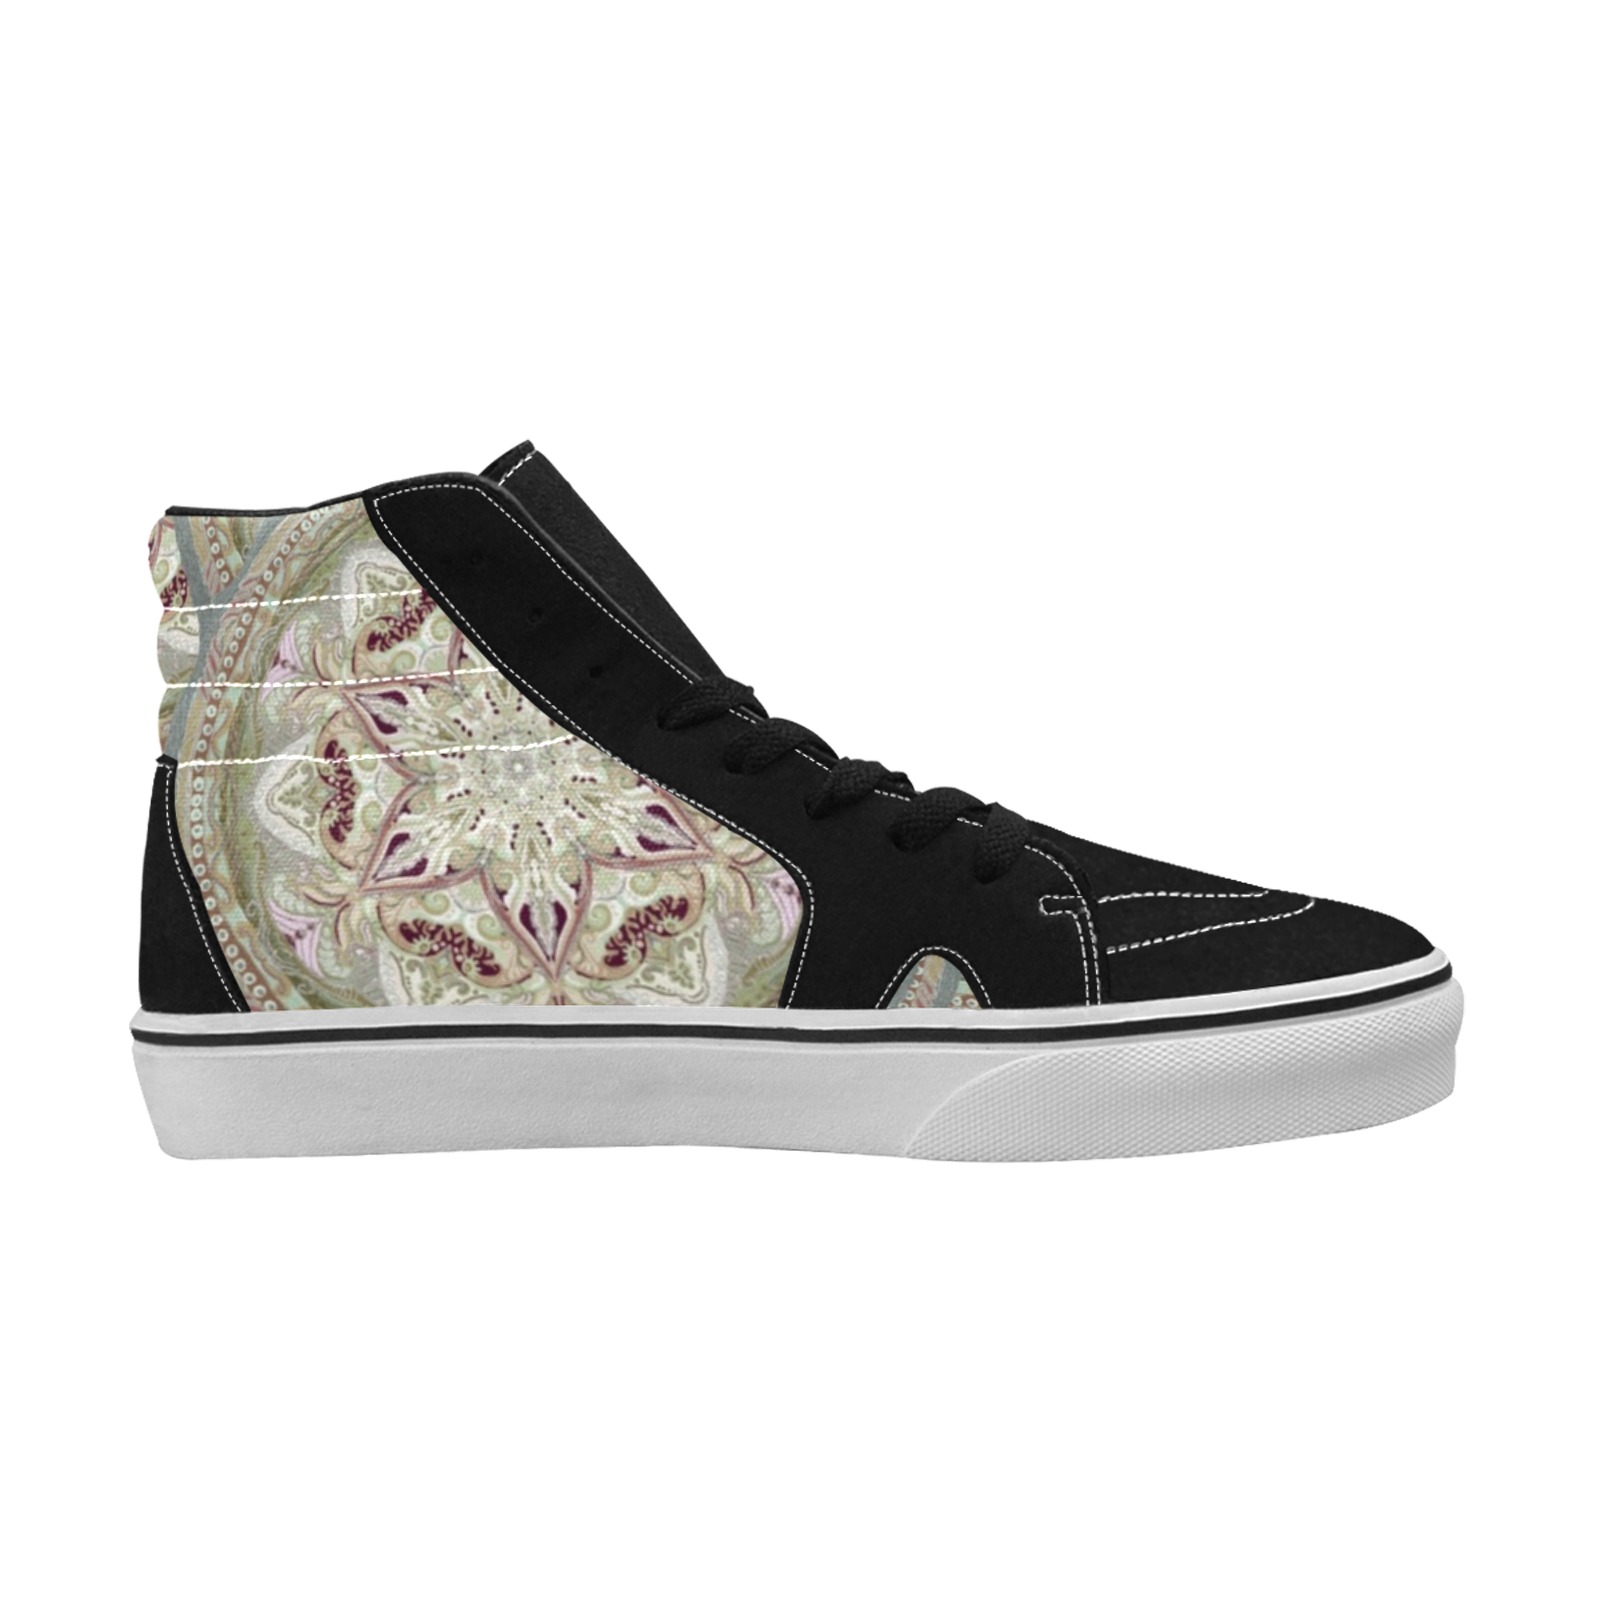 embroidery-pale green Men's High Top Skateboarding Shoes (Model E001-1)